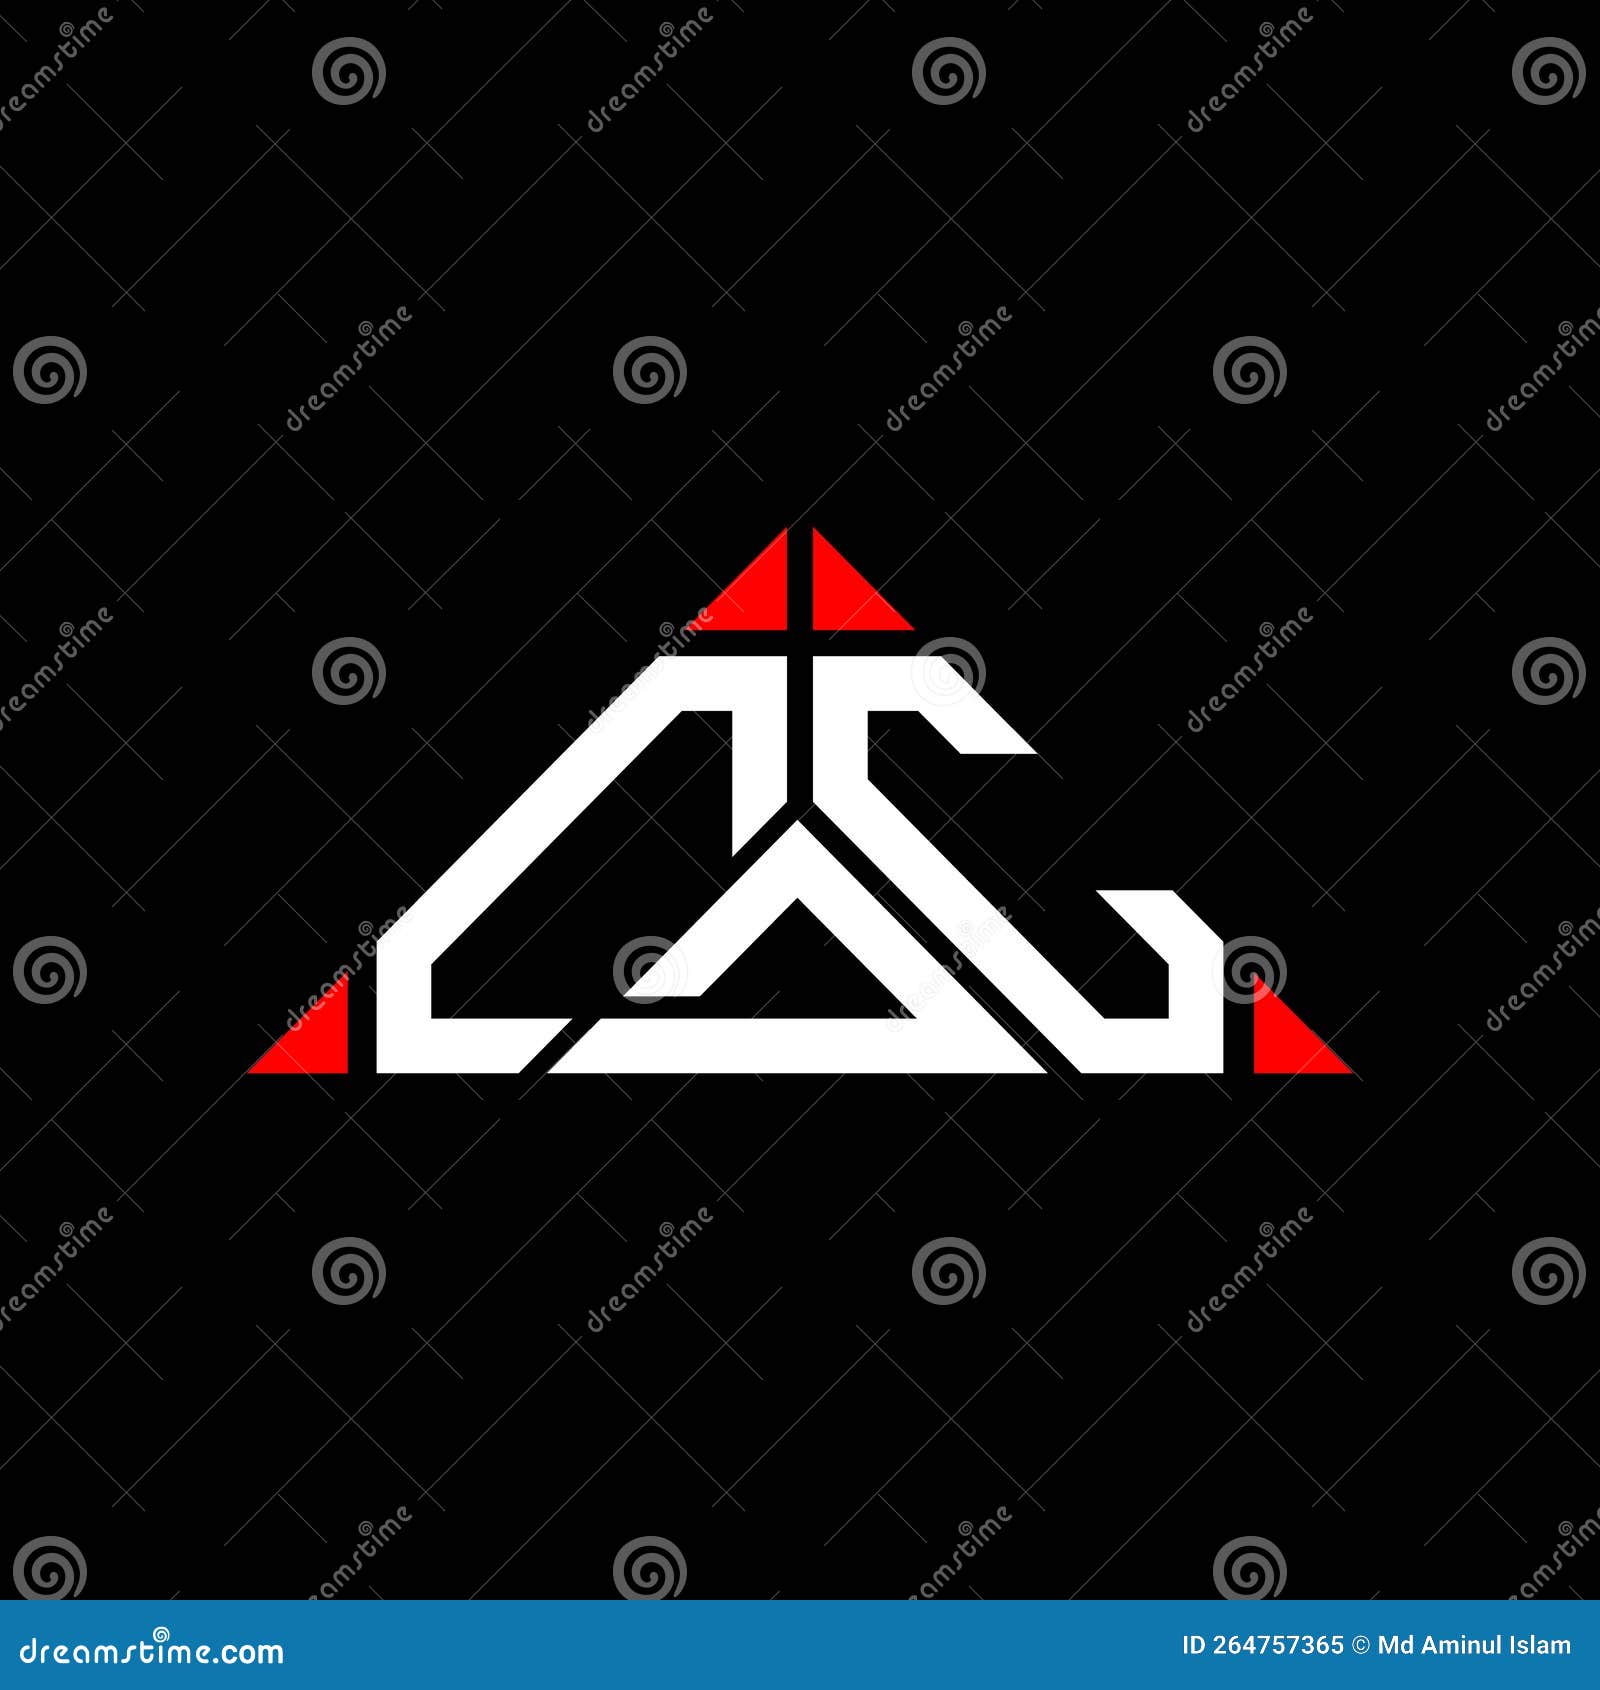 cdc letter logo creative  with  graphic,